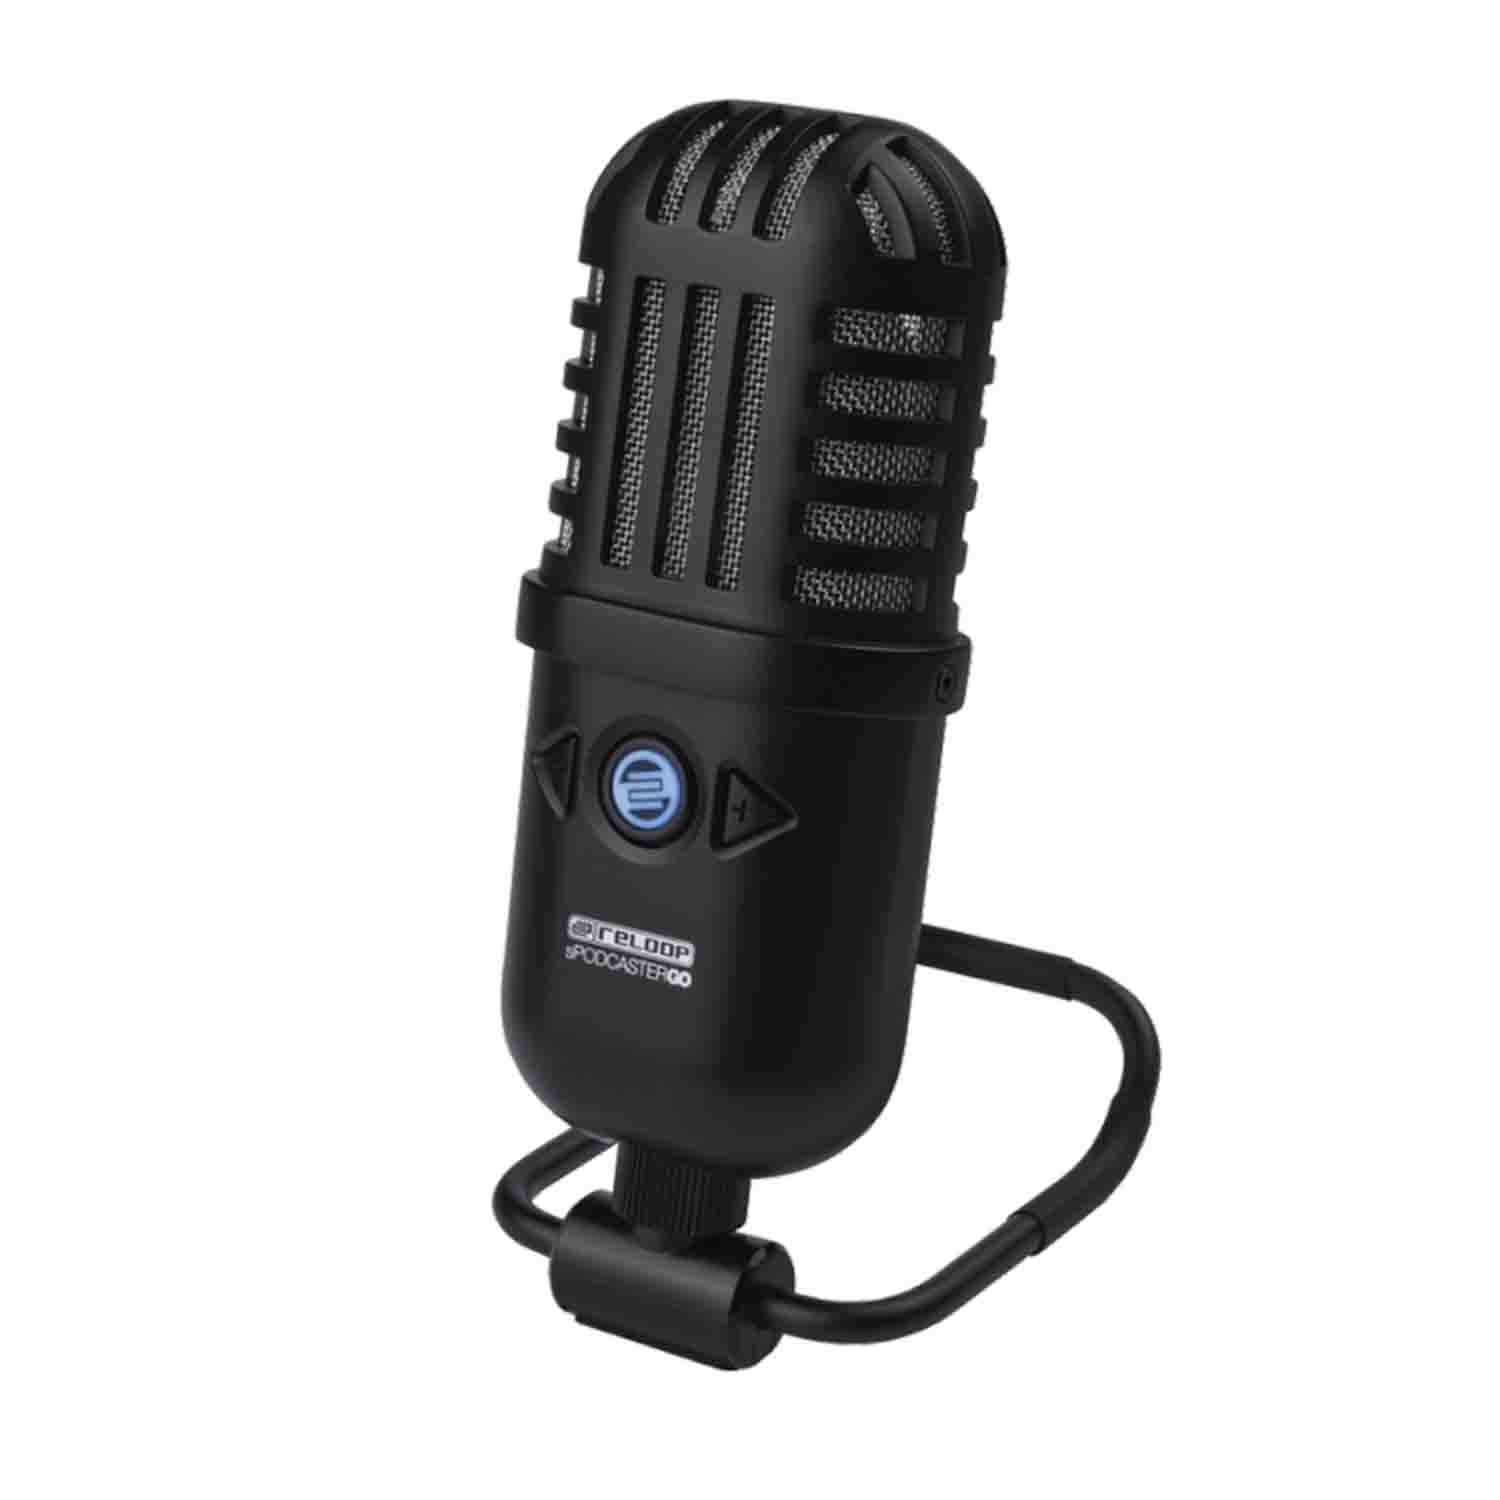 Reloop sPODCASTER-GO Professional USB Podcast Microphone - Hollywood DJ